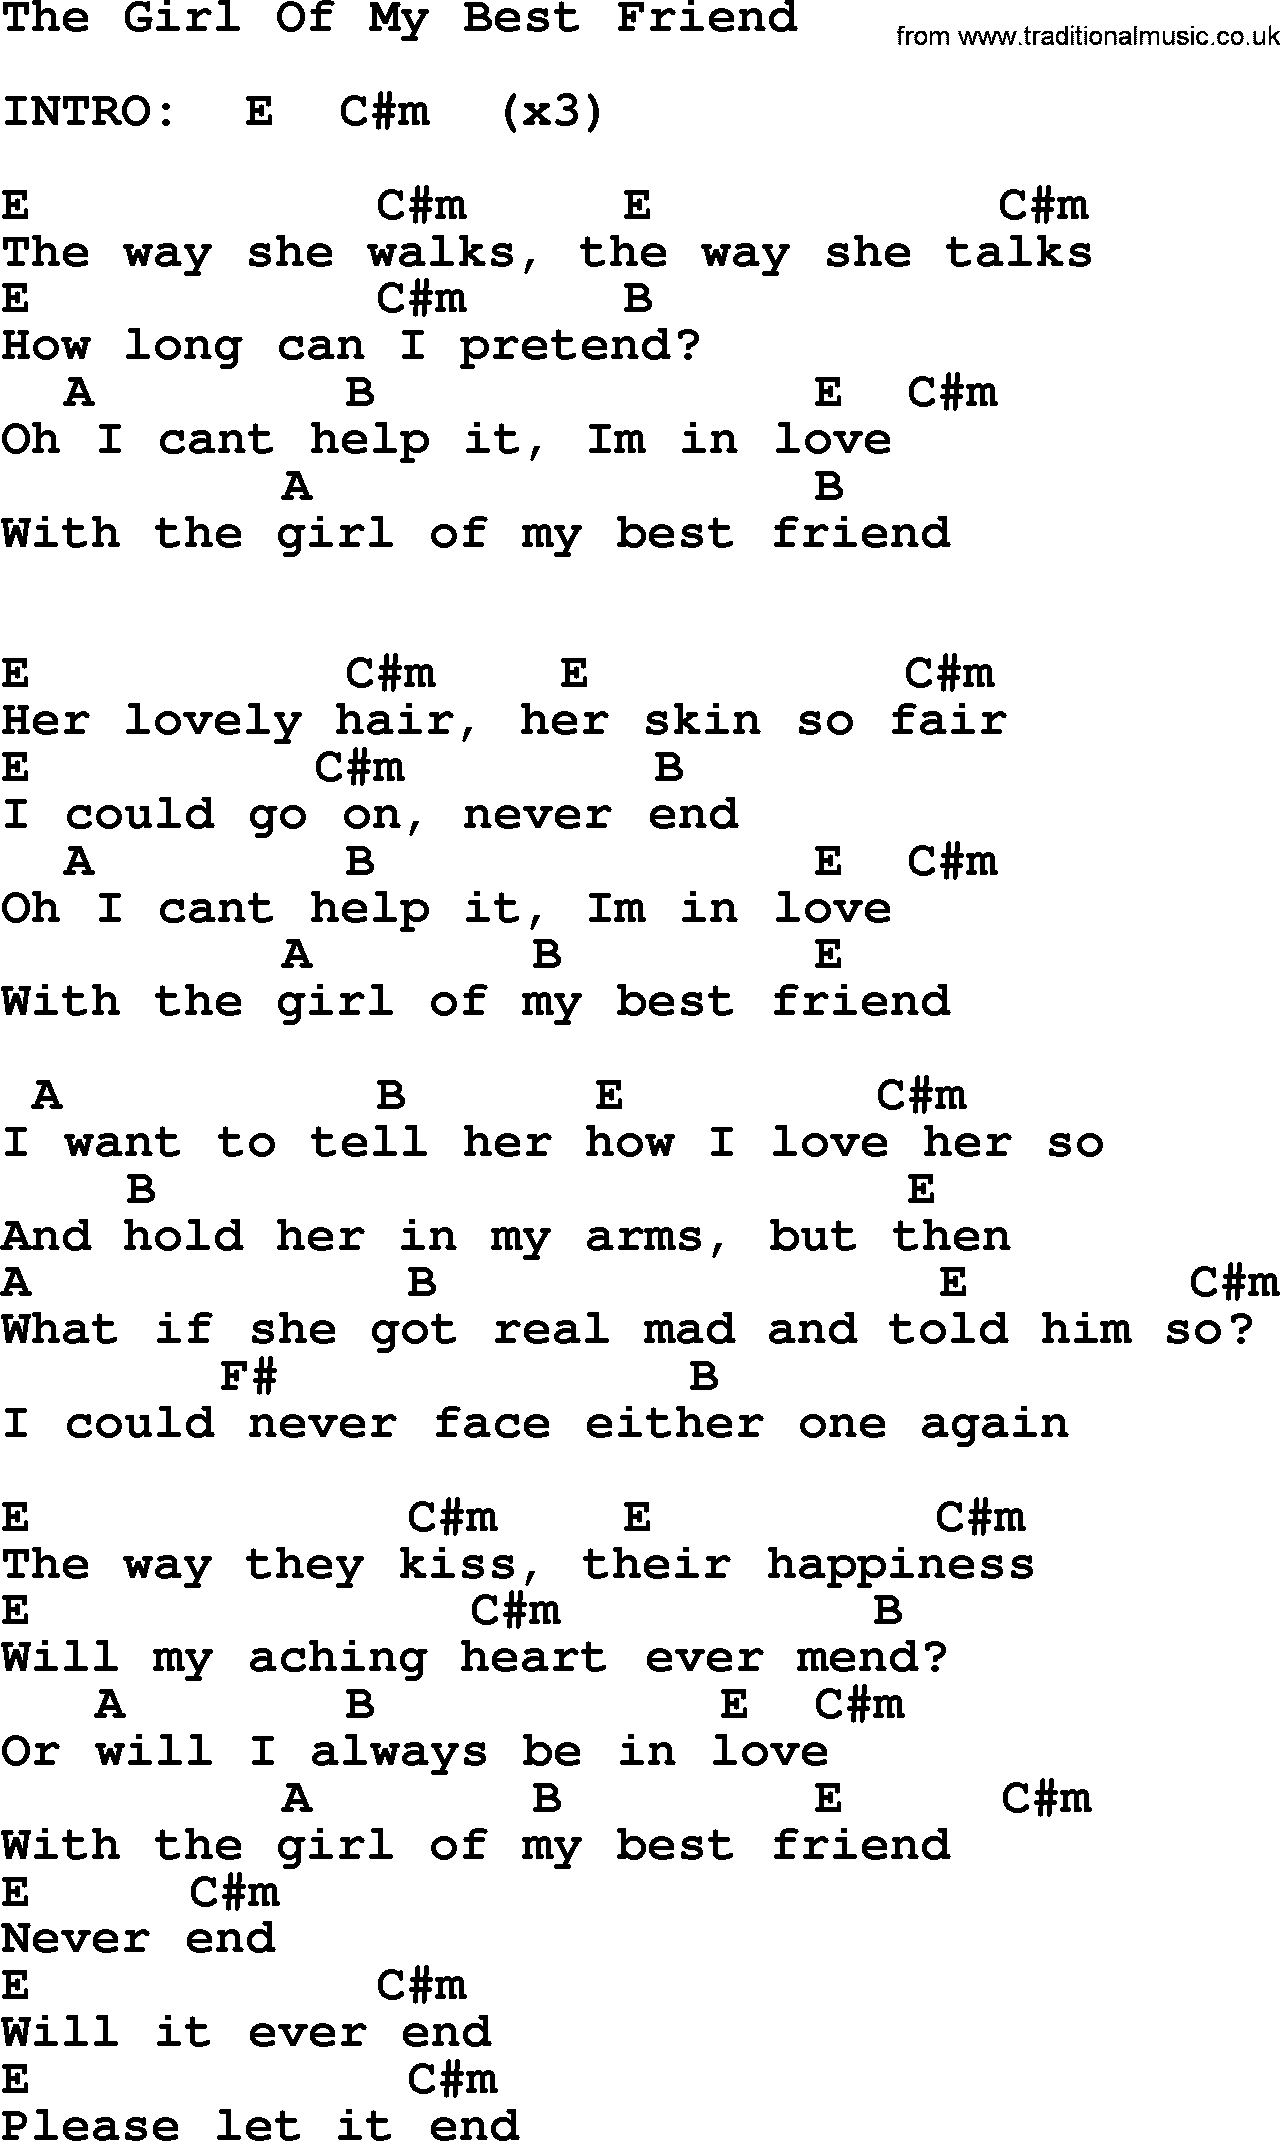 Elvis Presley song: The Girl Of My Best Friend, lyrics and chords